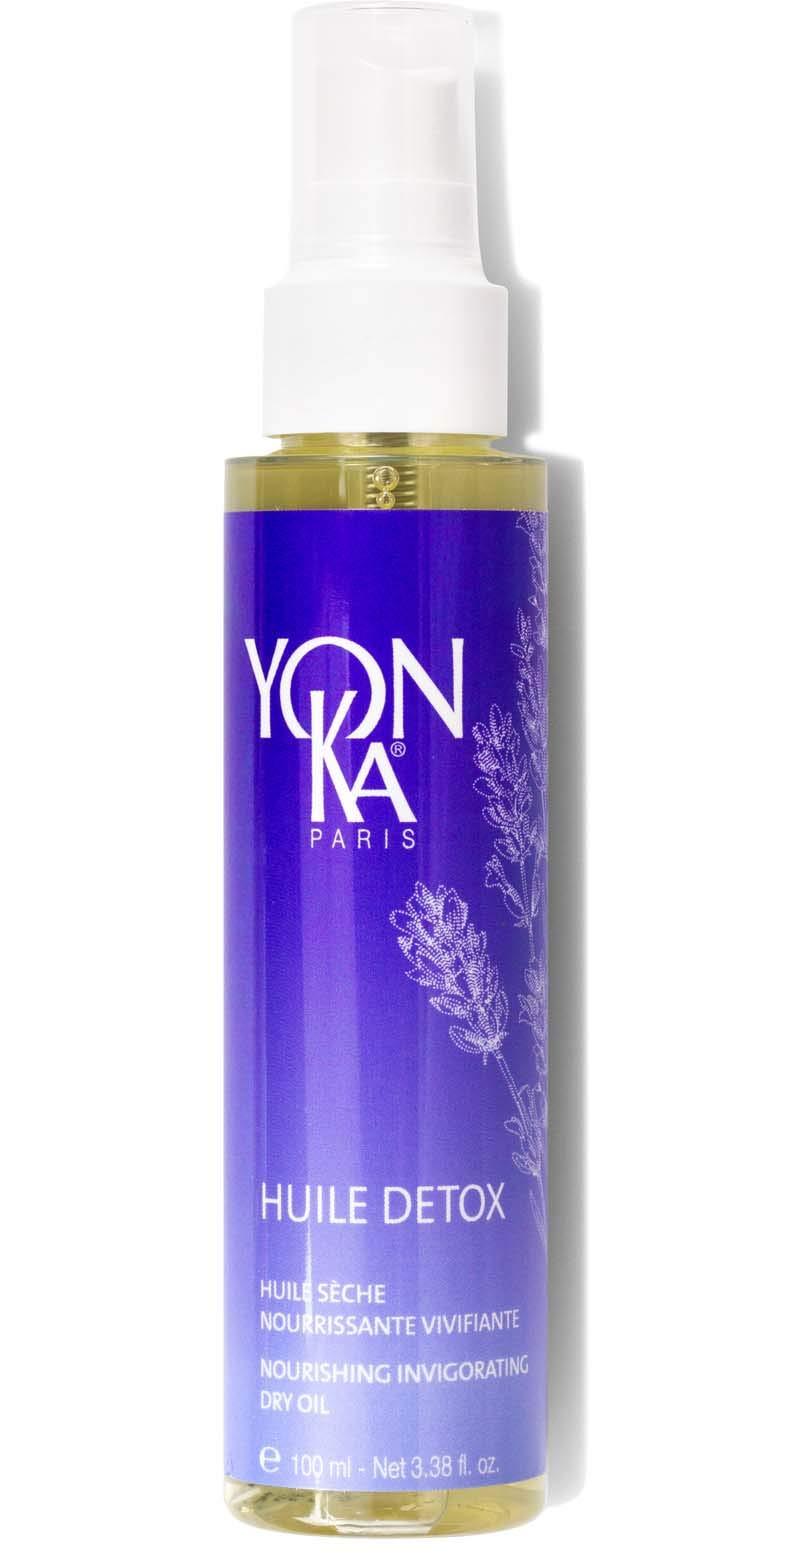 [Australia] - YON-KA - HUILE DETOX - Invigorating and Purifying Dry Oil Enriched With Resin From the Pistacia Lentiscus Tree, Sunflower, Sesame, and Baobab (3.3 Ounces / 100 Milliliters) 